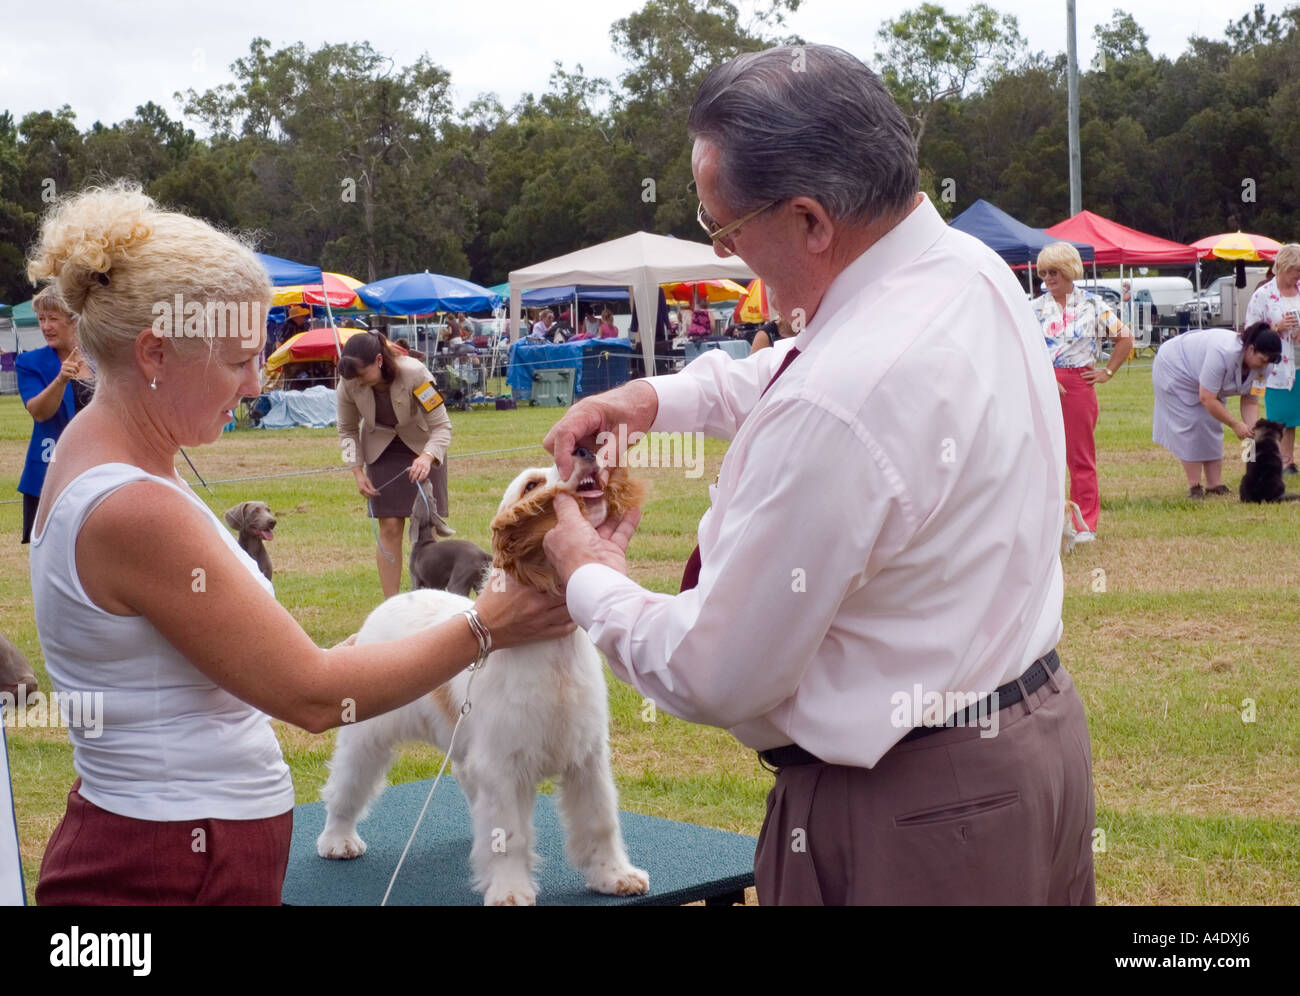 A young dog gets judged at a regional show in Australia. DSC 8286 Stock Photo